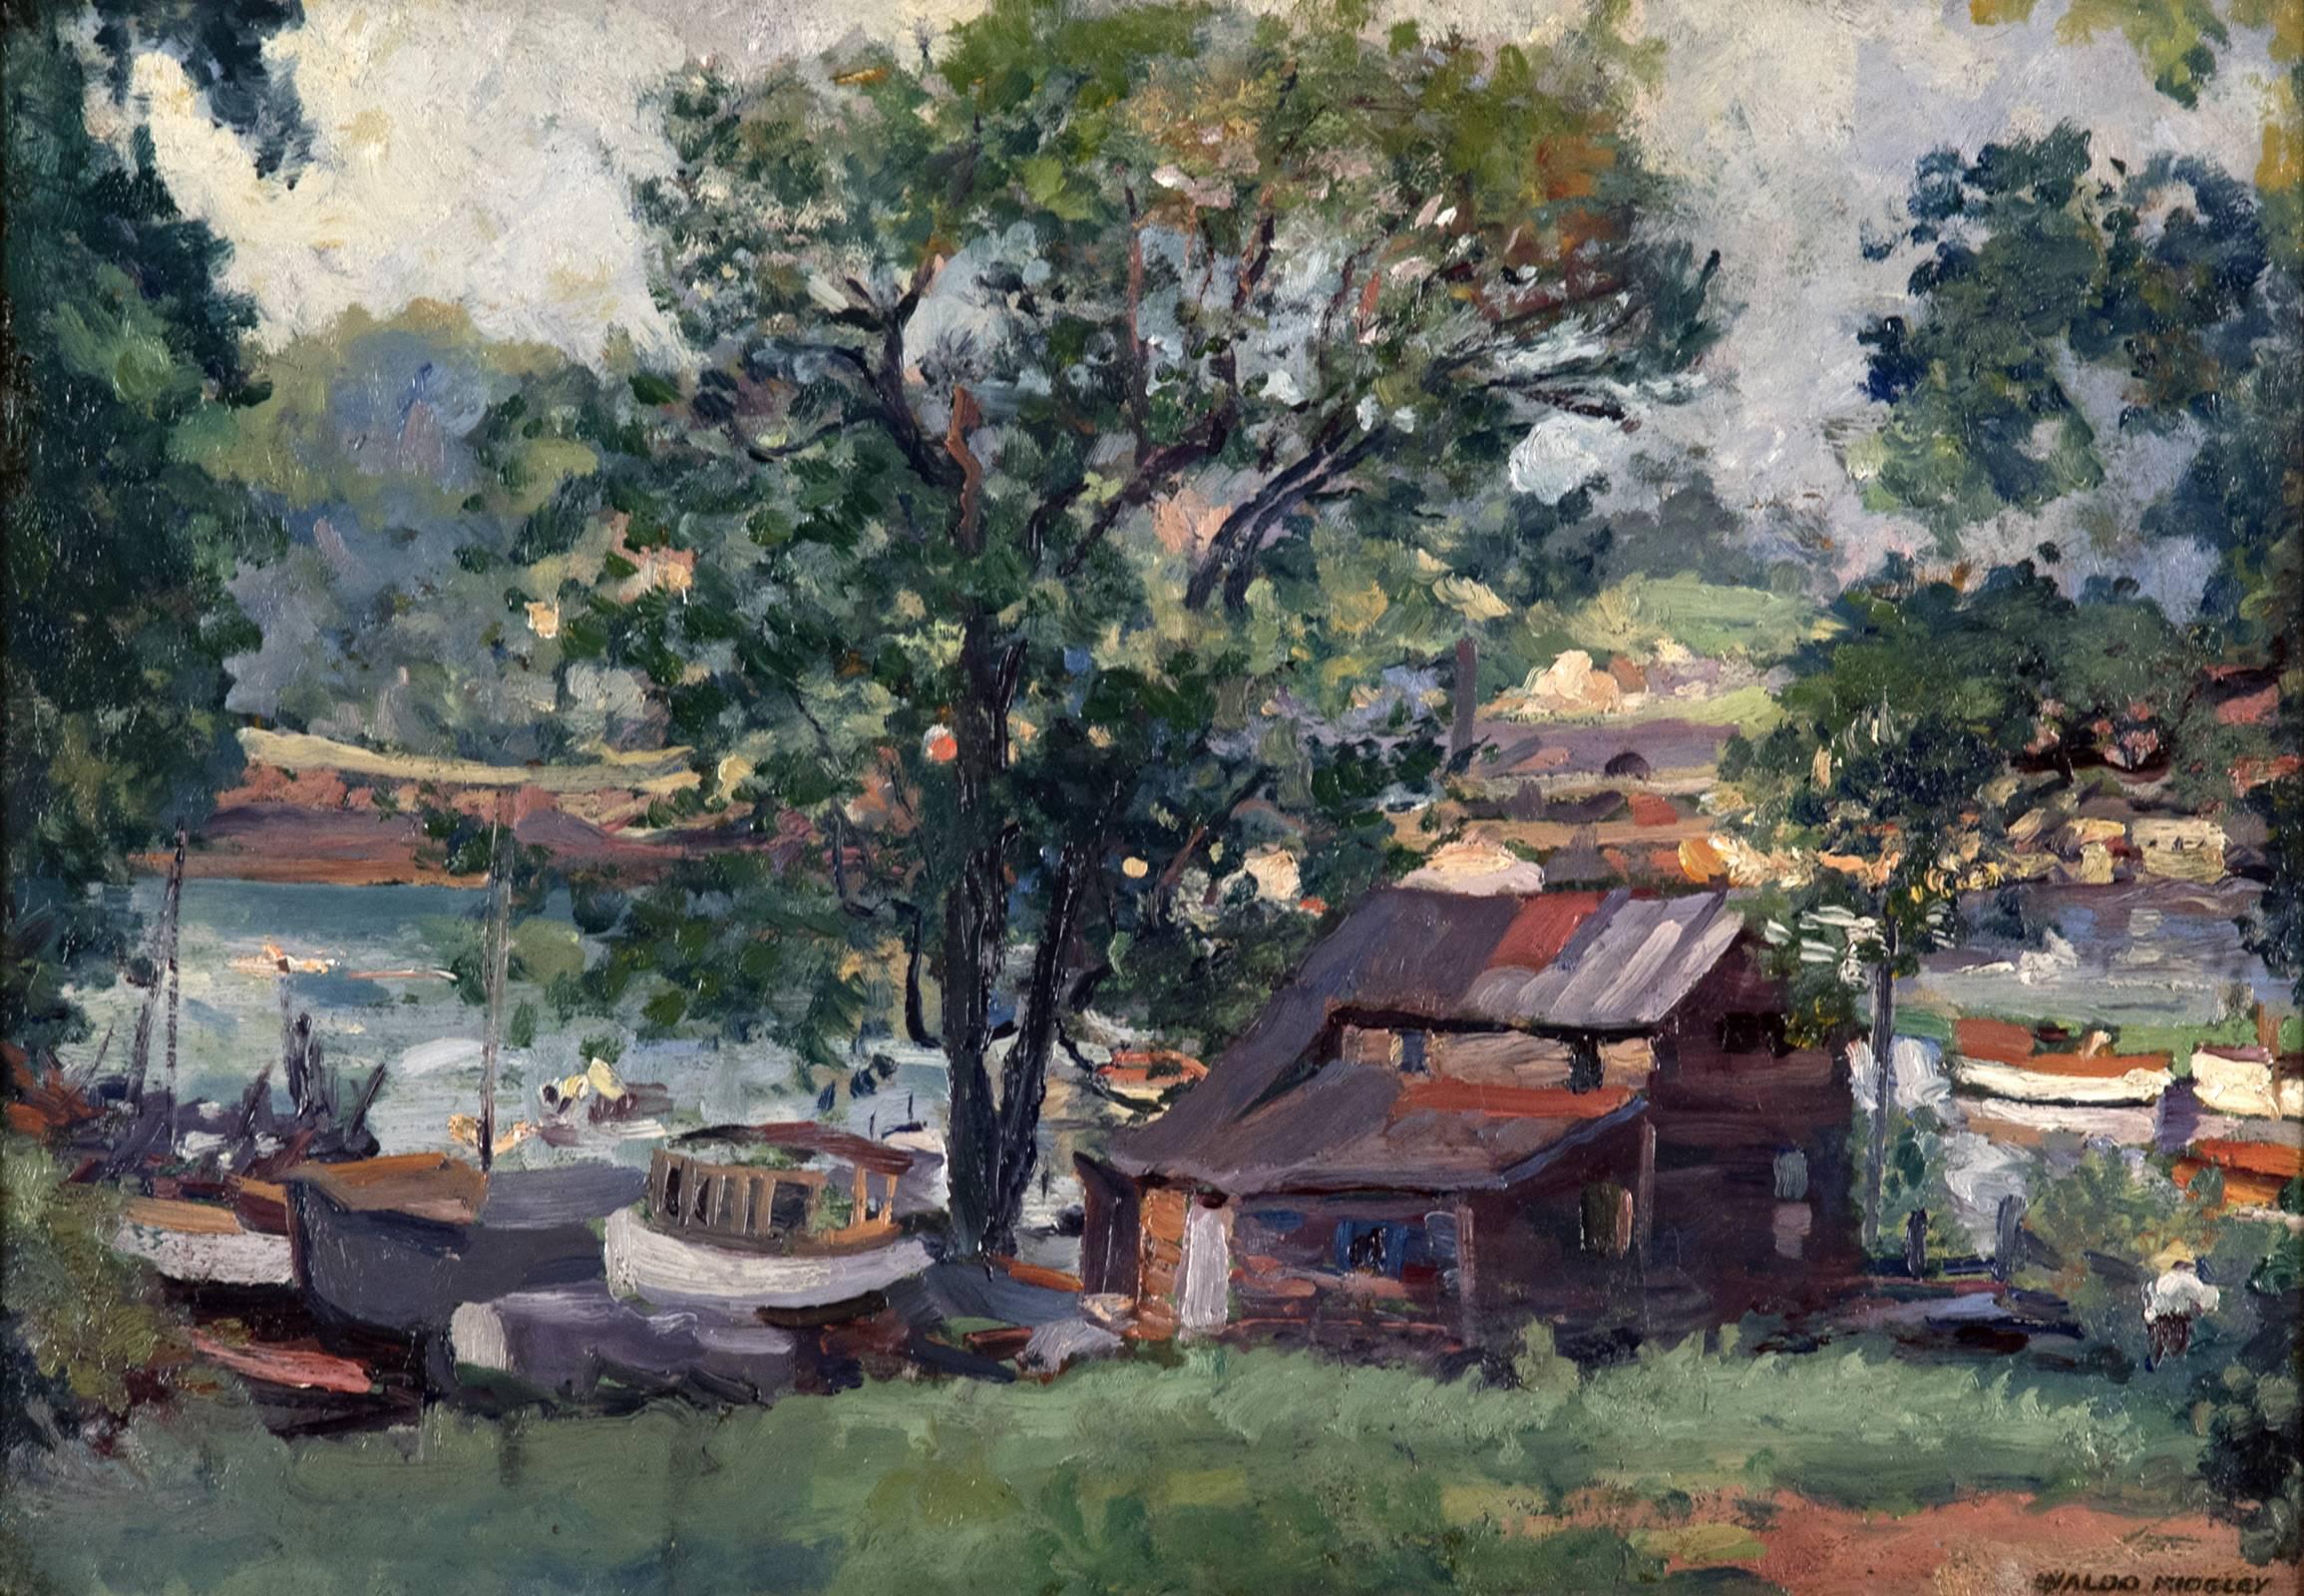 Waldo Park MidgleyIn this everyday scene an old, decrepit structure sits in the foreground of the painting, an old boat house on the shore of the Harlem River. Midgley uses thick impasto and impressionistic brush strokes to convey a sense of